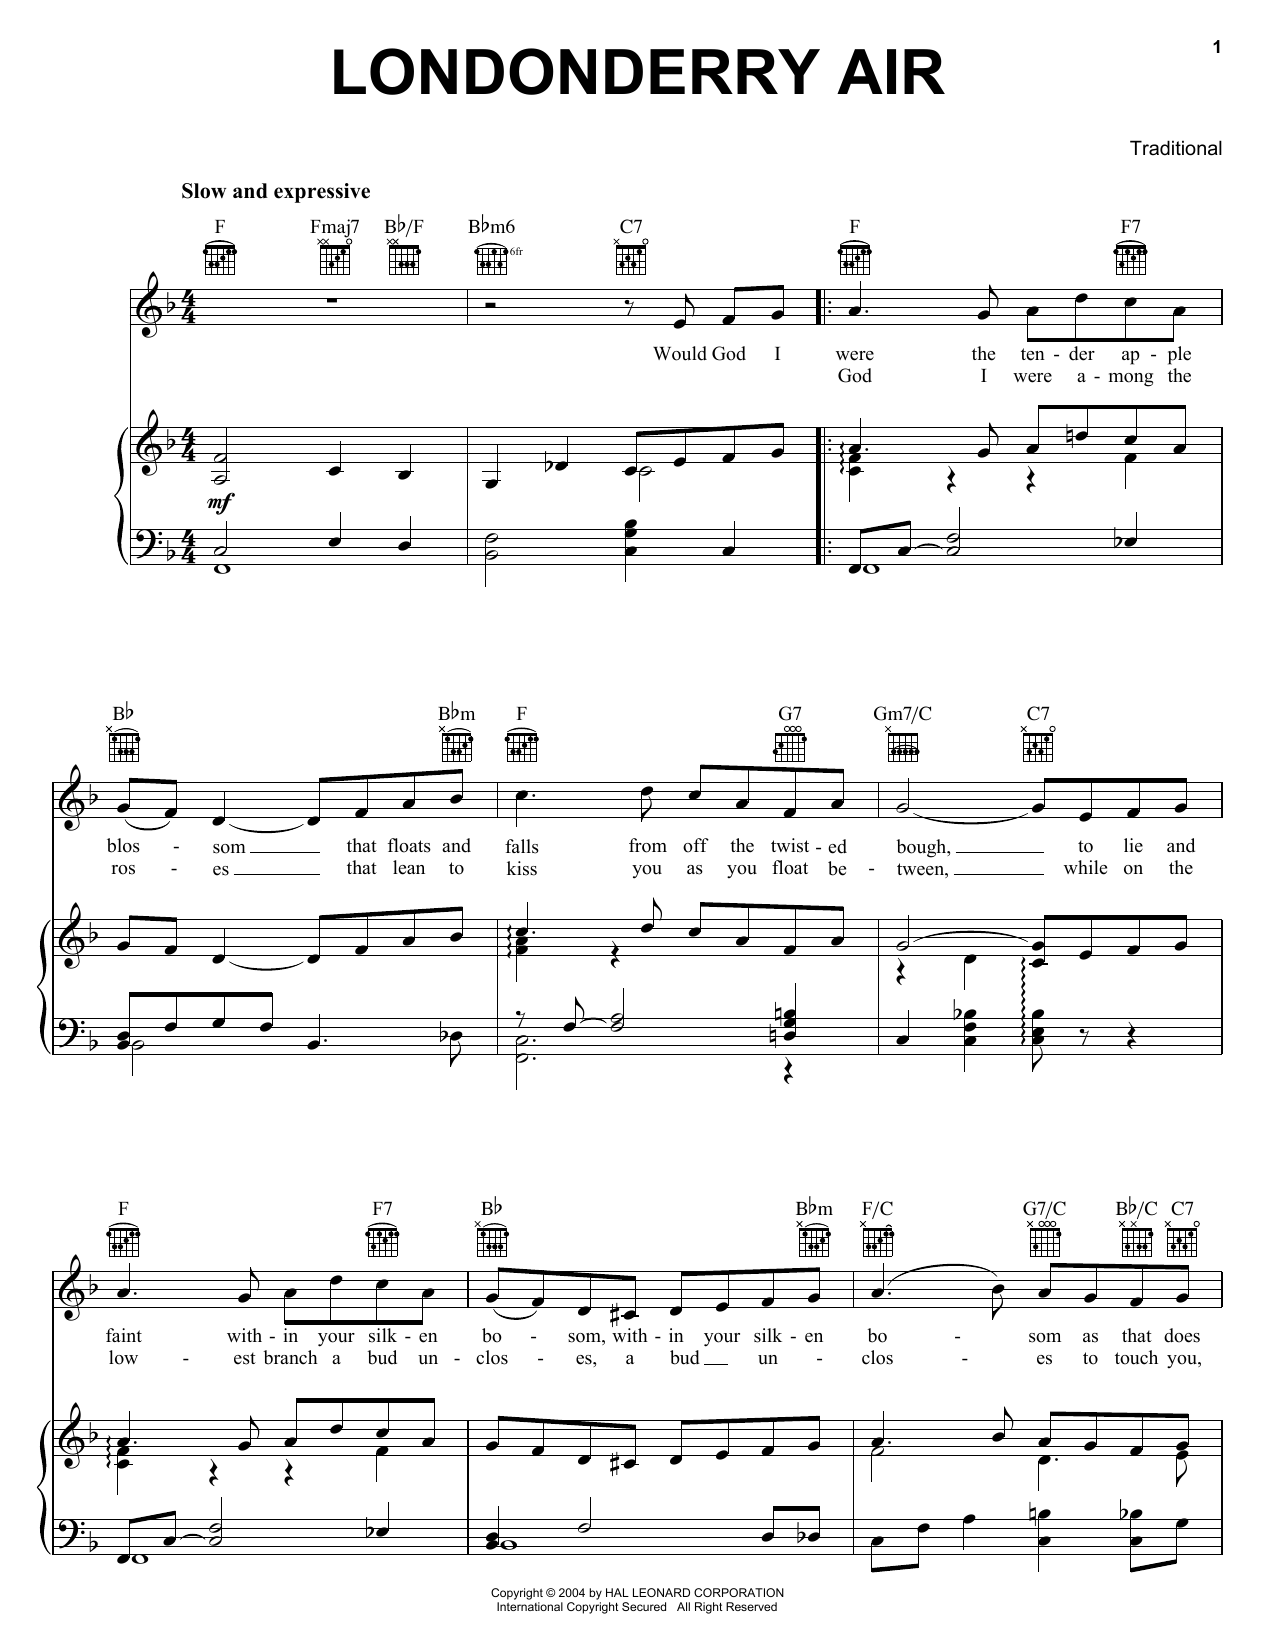 Download Traditional Londonderry Air Sheet Music